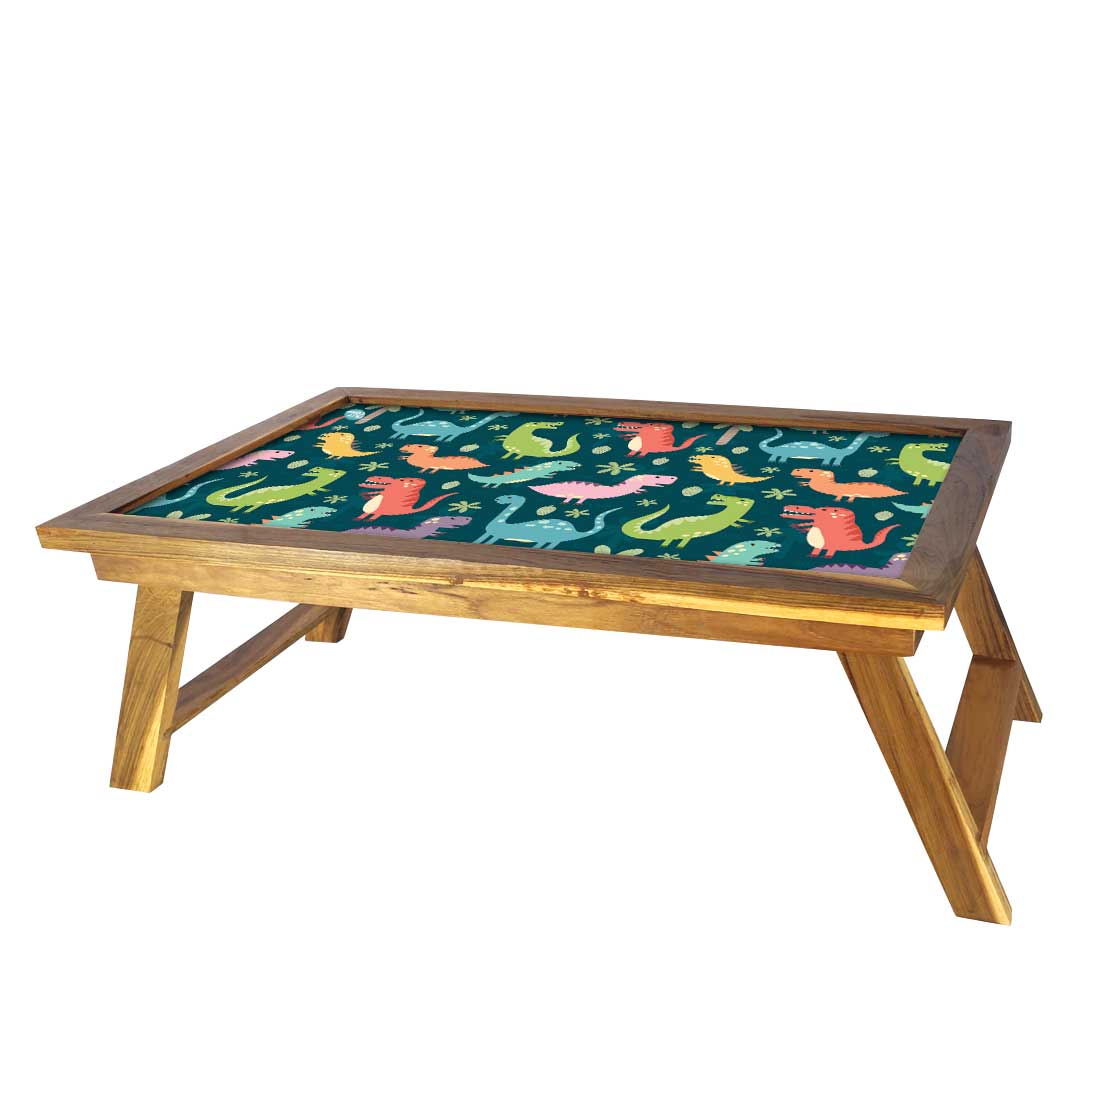 Wooden Small Breakfast Table for Bed Laptop Desk - Sweet Dinosaurs Nutcase